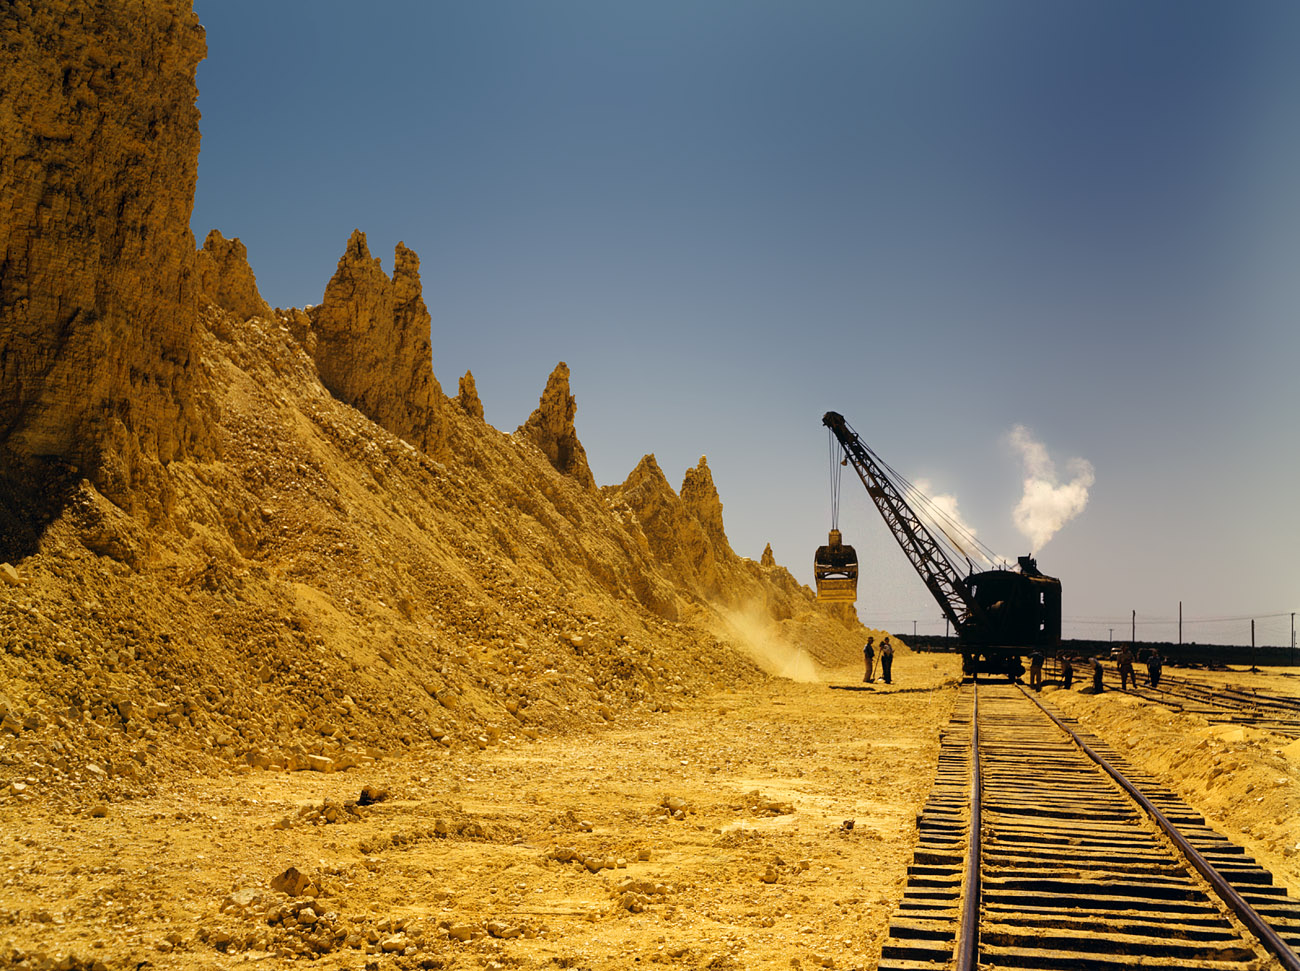 May 1943. "Nearly exhausted sulfur vat from which railroad cars are loaded. Freeport Sulphur Company at Hoskins Mound, Texas." View full size. 4x5 Kodachrome transparency by John Vachon, Office of War Information.